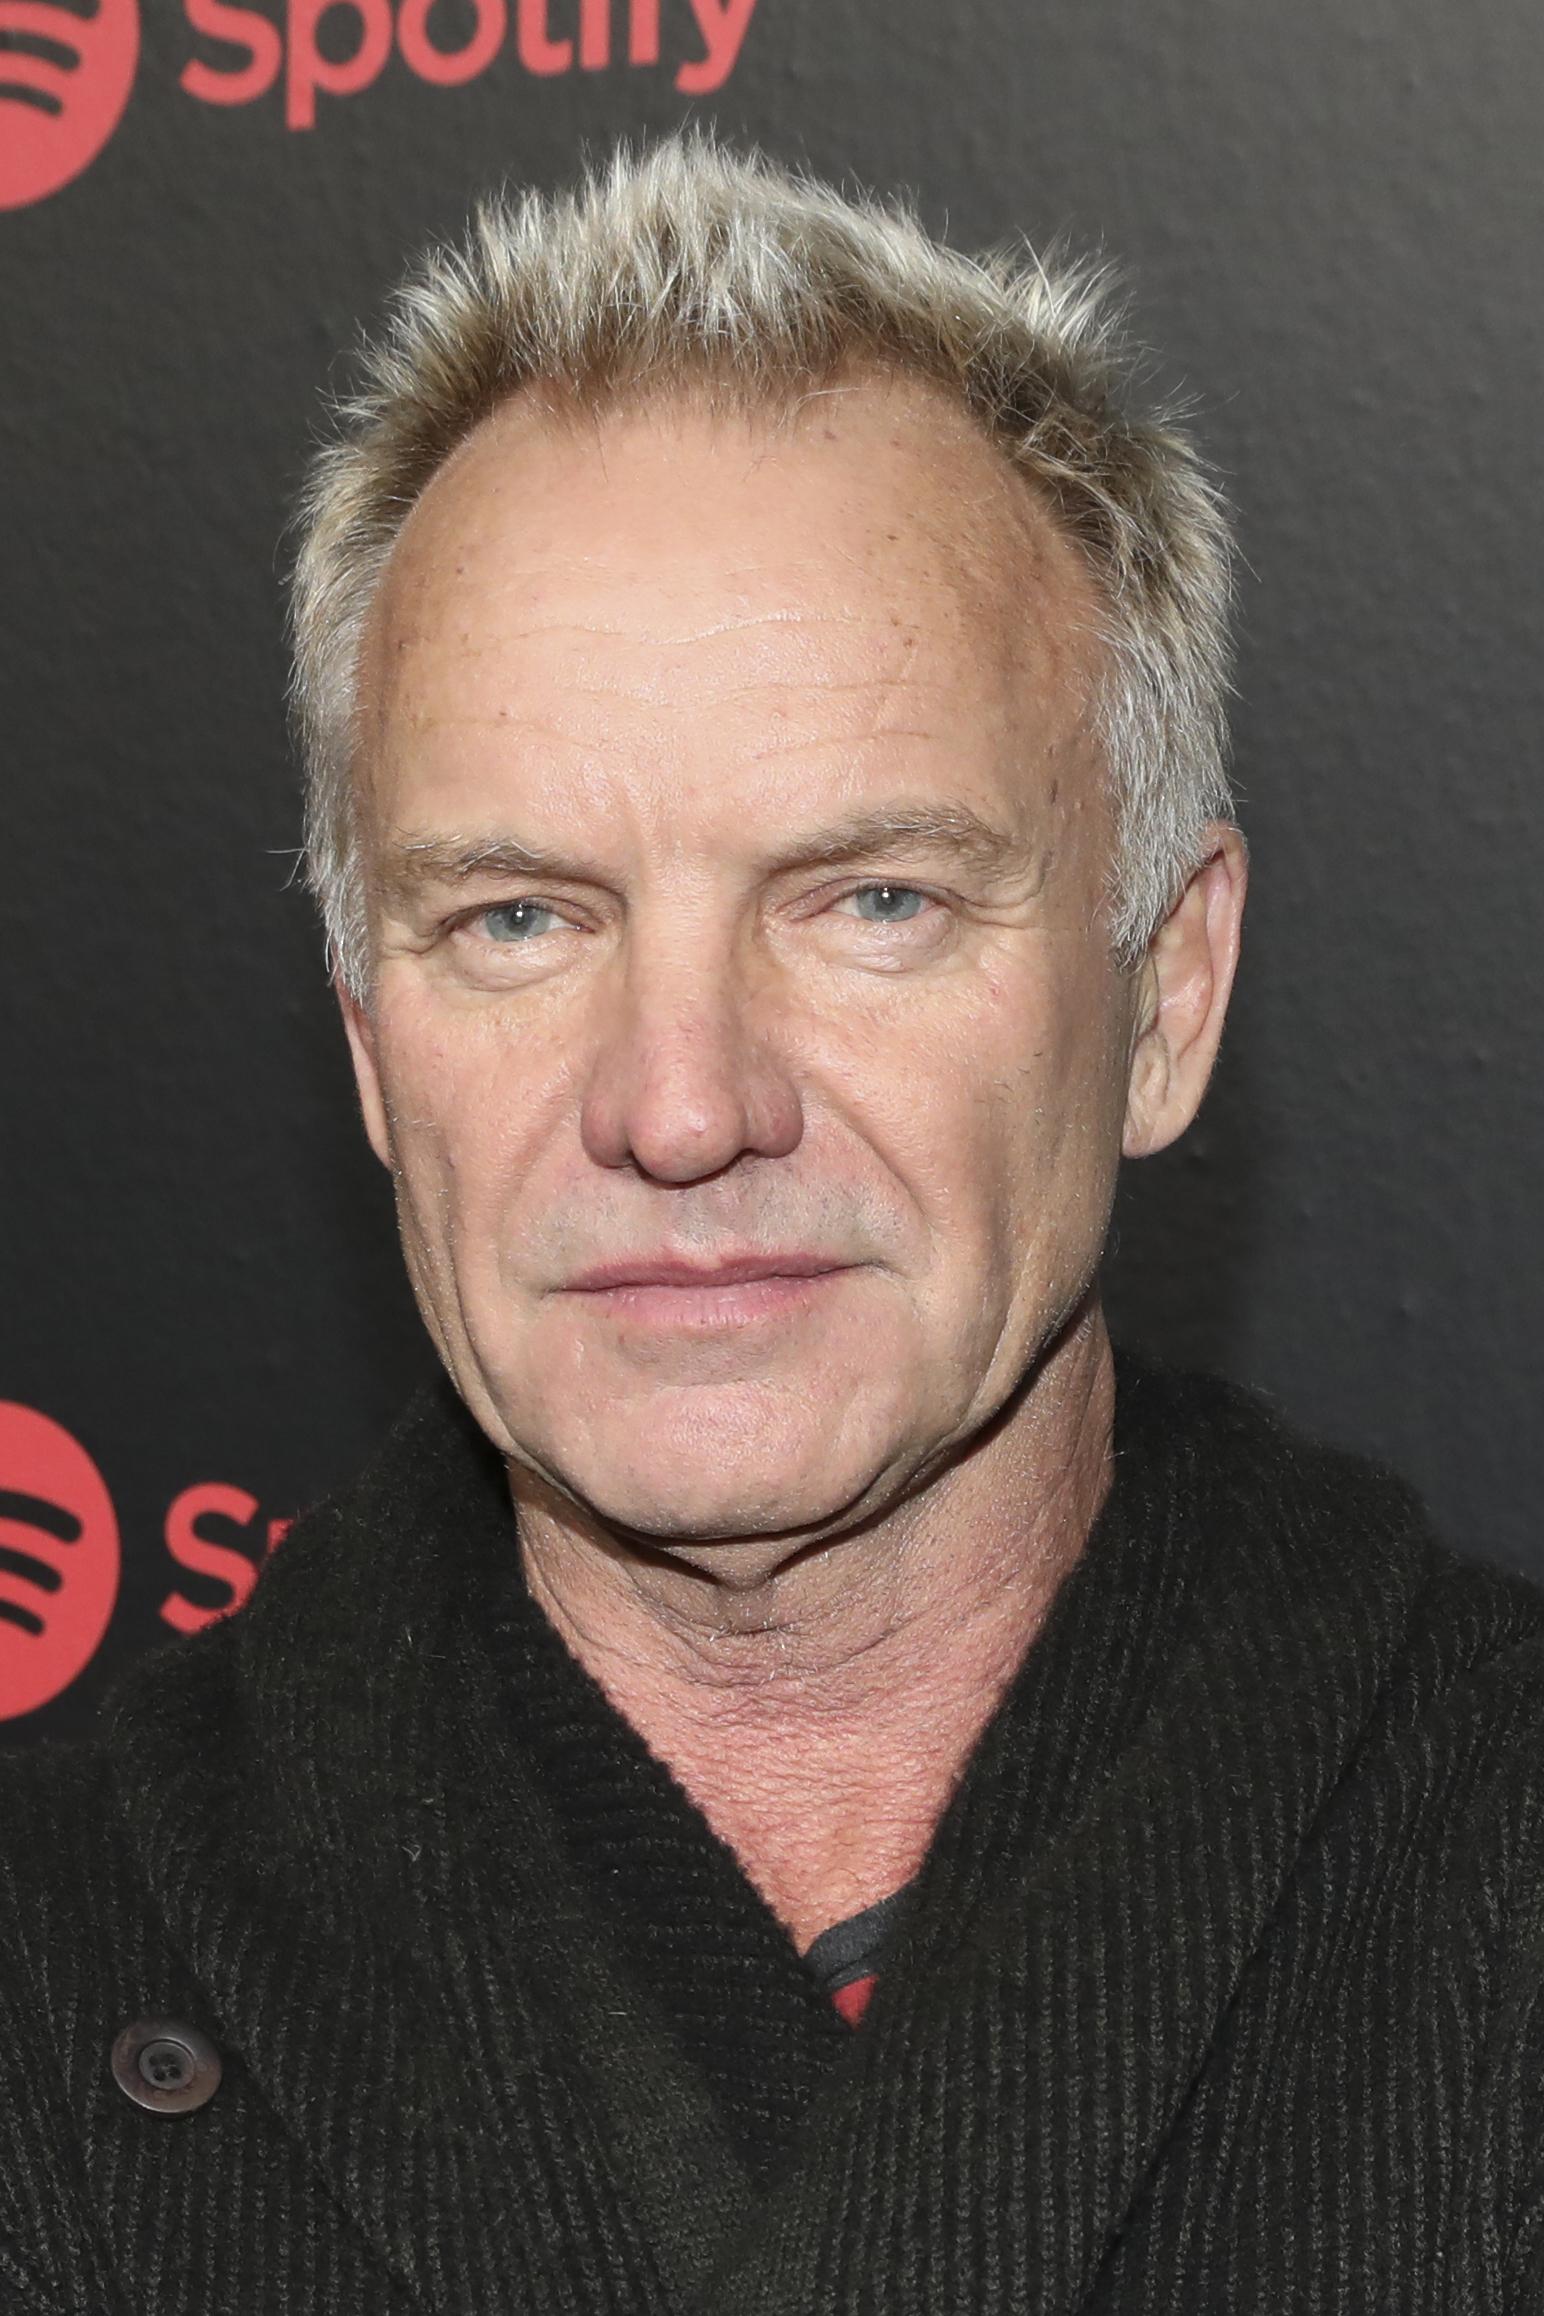 Sting receives honorary degree, sings at Brown University The